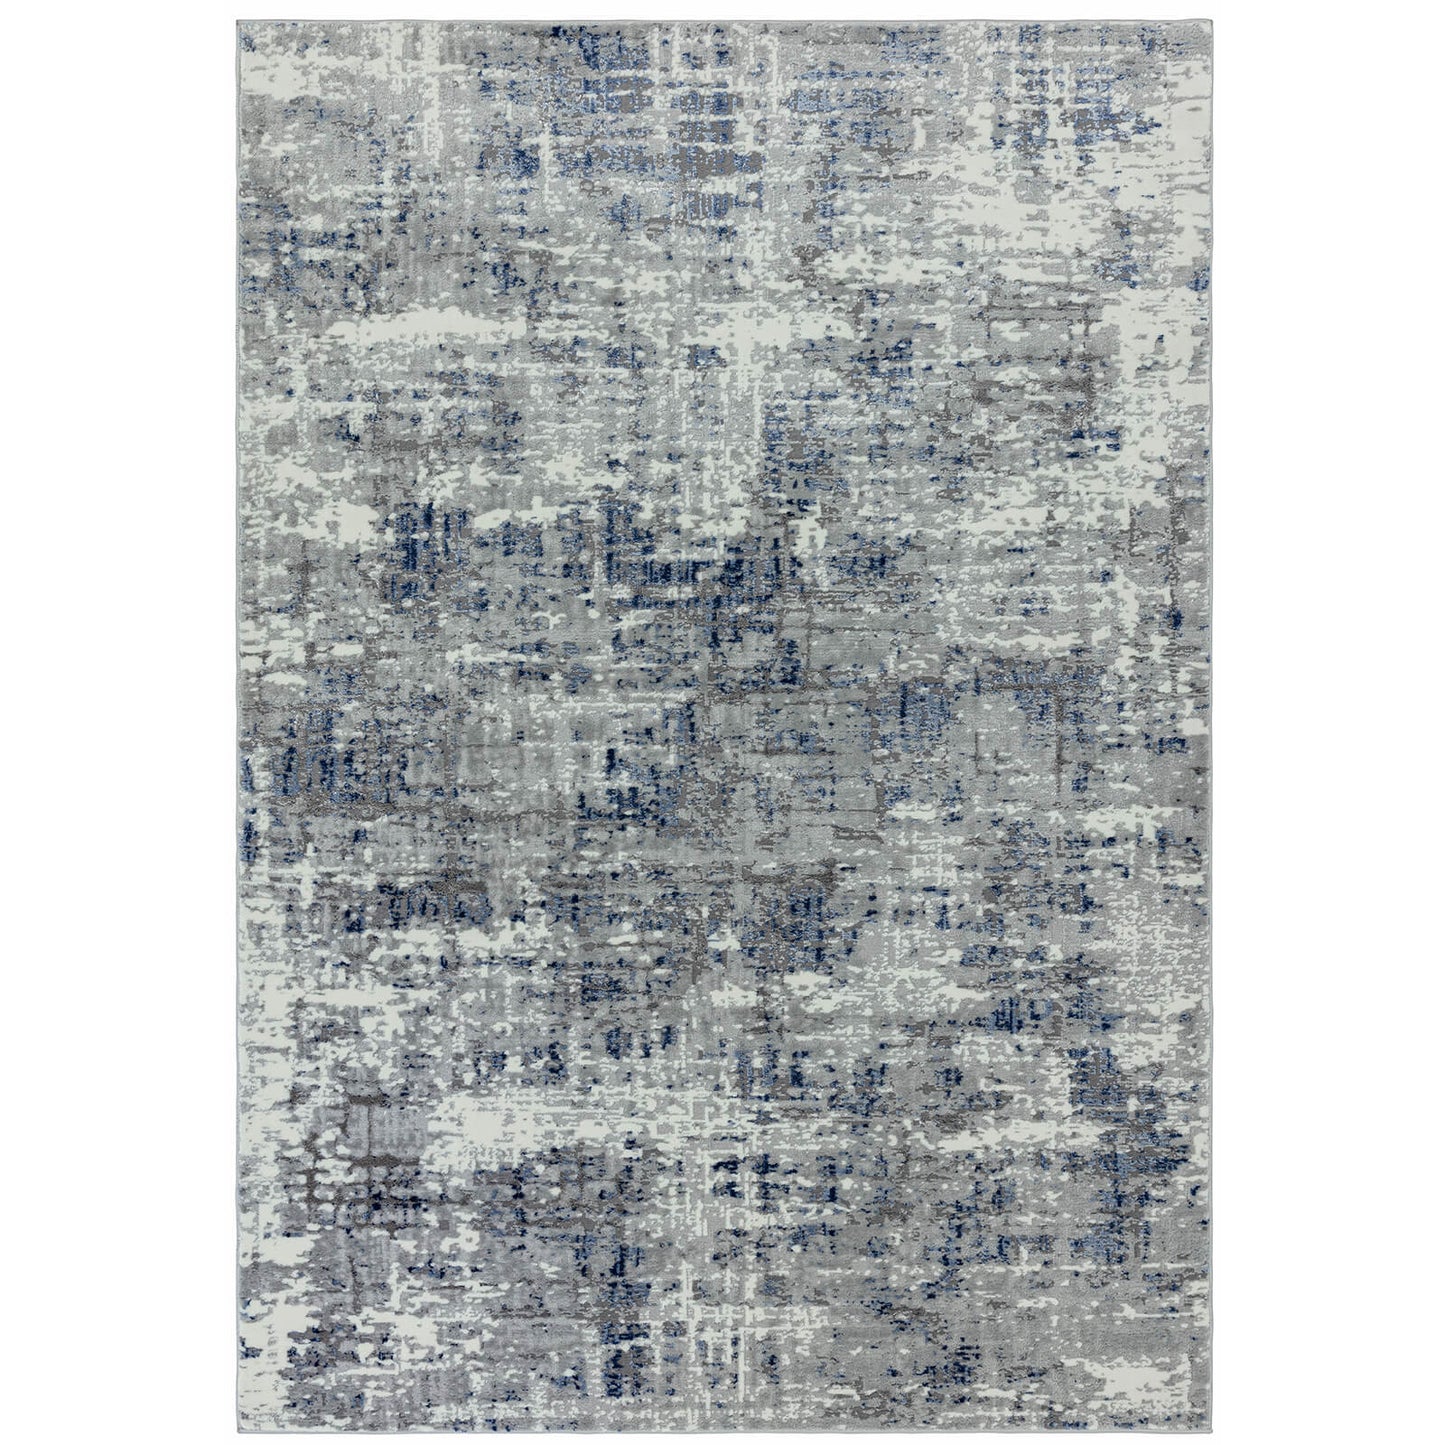 Asiatic Orion OR04 Abstract Blue Rug